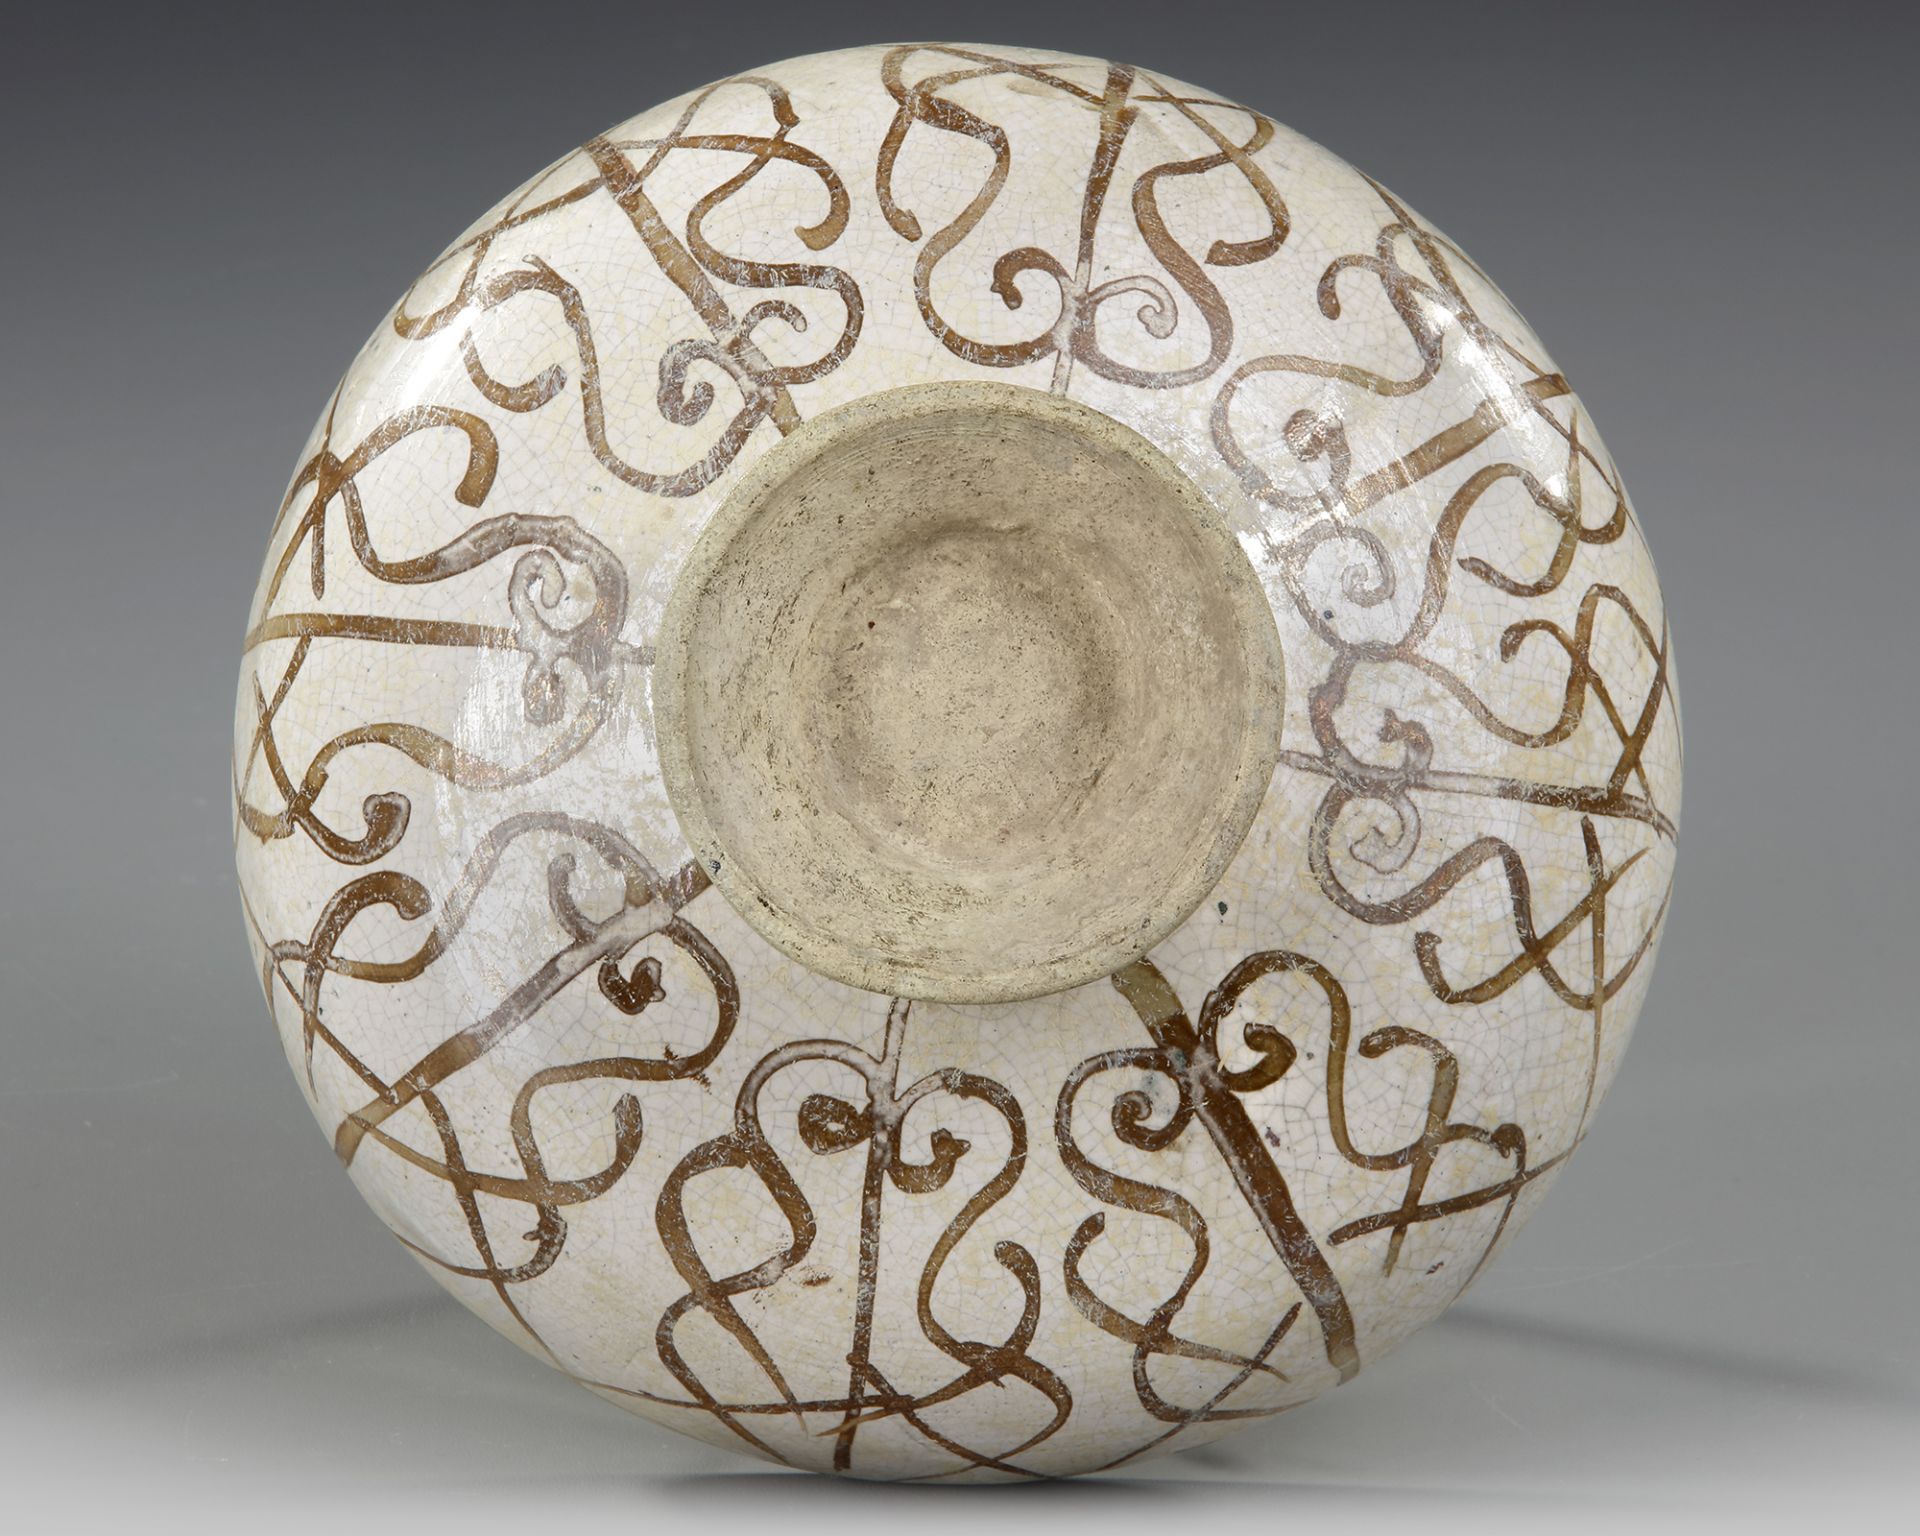 A KASHAN LUSTRE POTTERY BOWL, PERSIA, LATE 12TH - EARLY 13TH CENTURY - Image 4 of 8